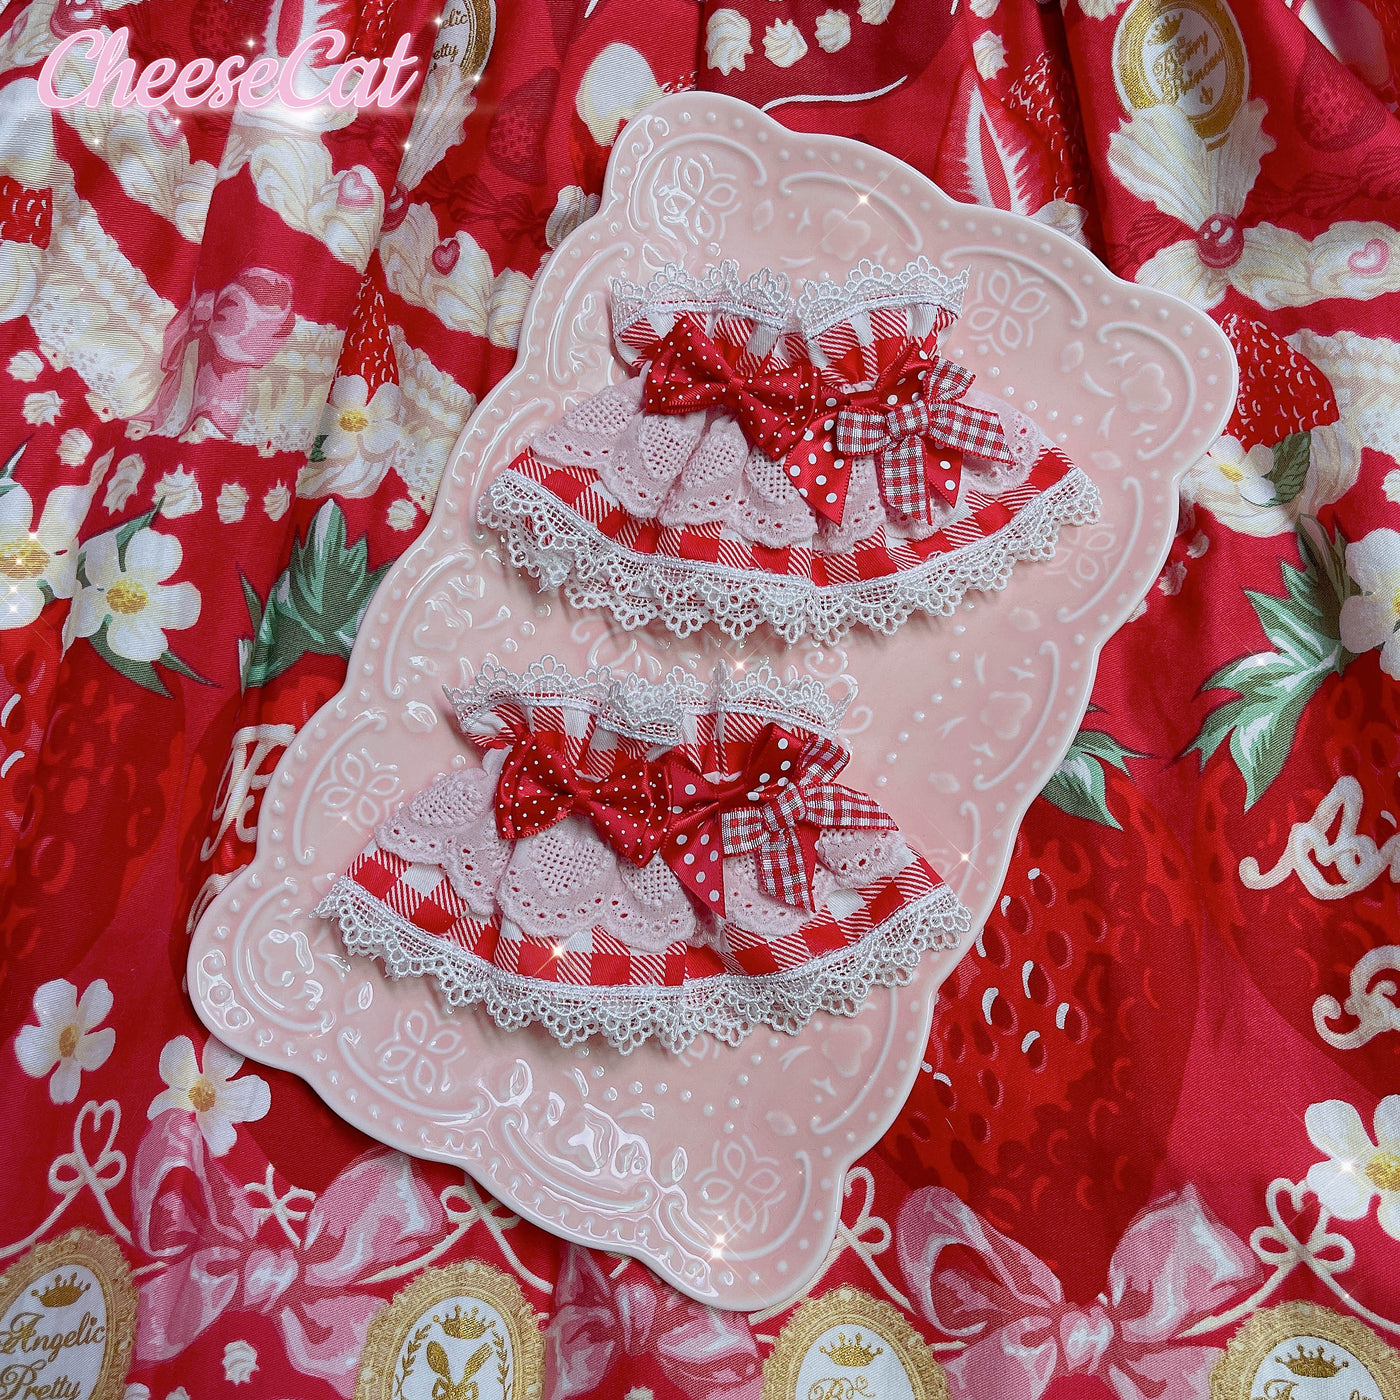 (Buyforme)CheeseCat~Sweet and Playful Strawberry Gingham Lace Cuffs red plaid cuffs (1 pair)  